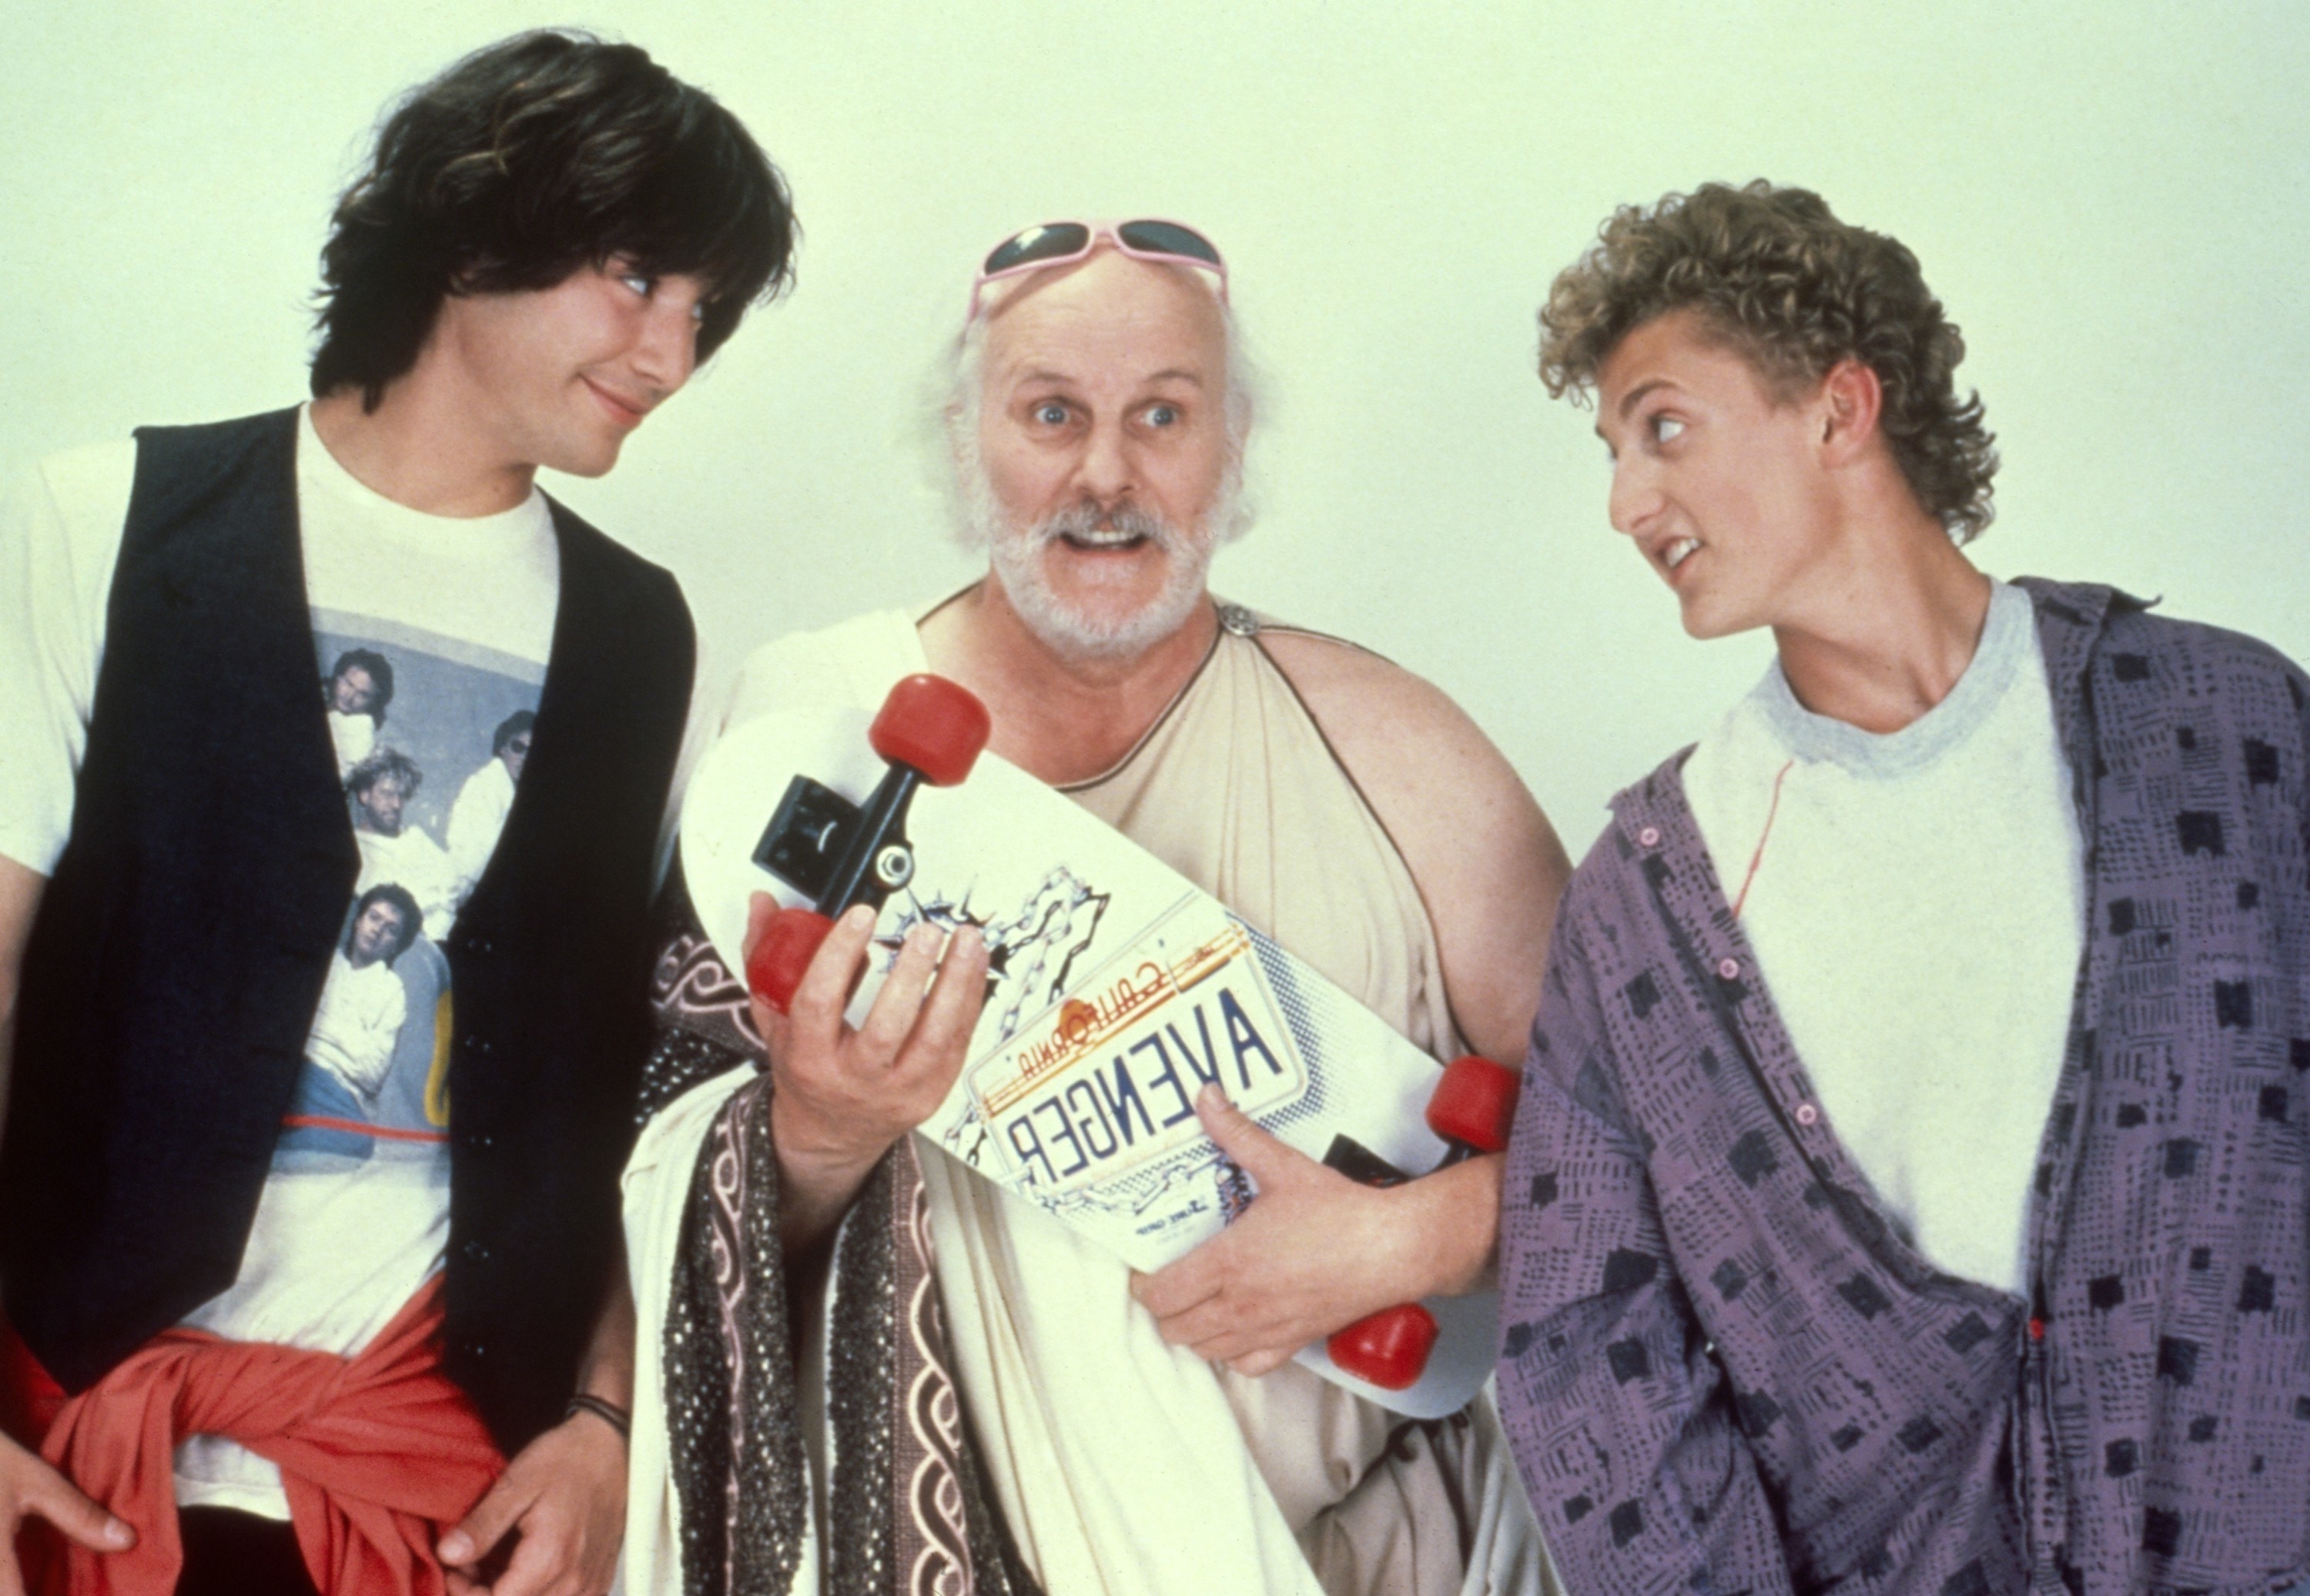 Keanu Reeves and Alex Winter pose with Tony Steedman holding a skateboard